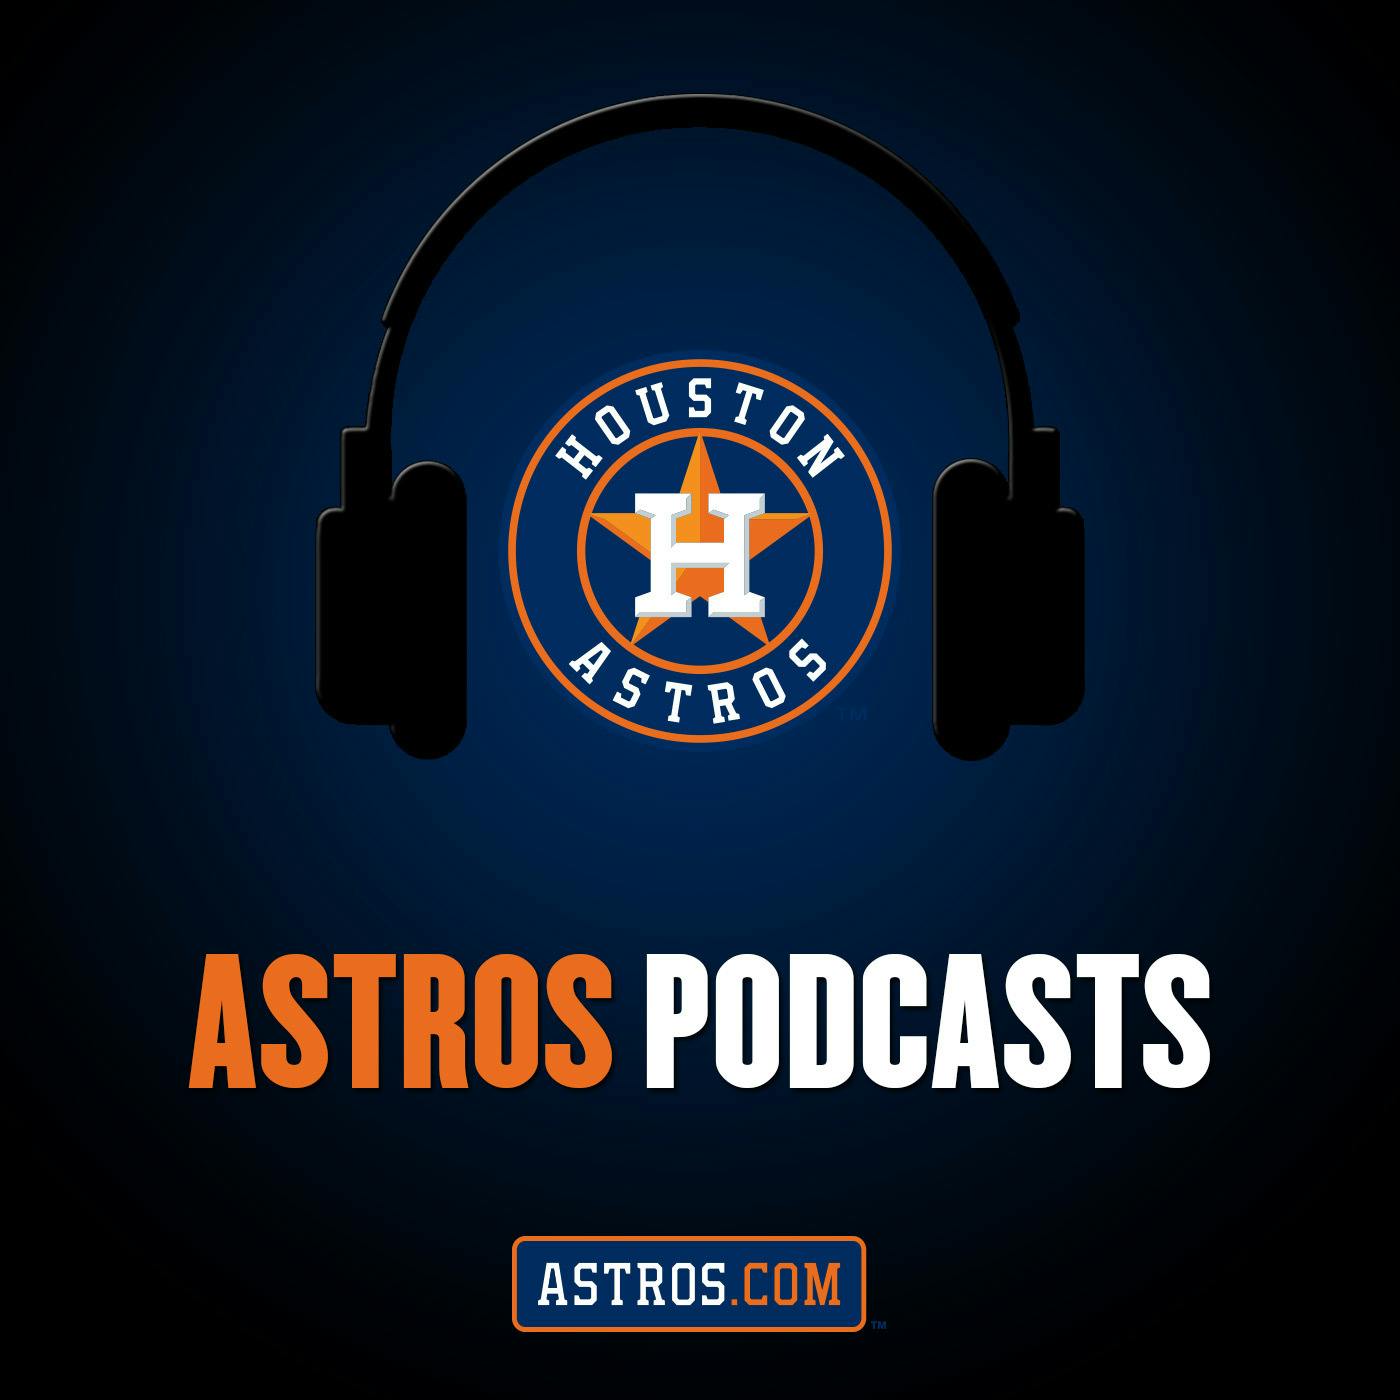 3/4 SPRING TRAINING PODCAST: Game 11 Preview, Steve Sparks, Brian McTaggart, Mike Coffin